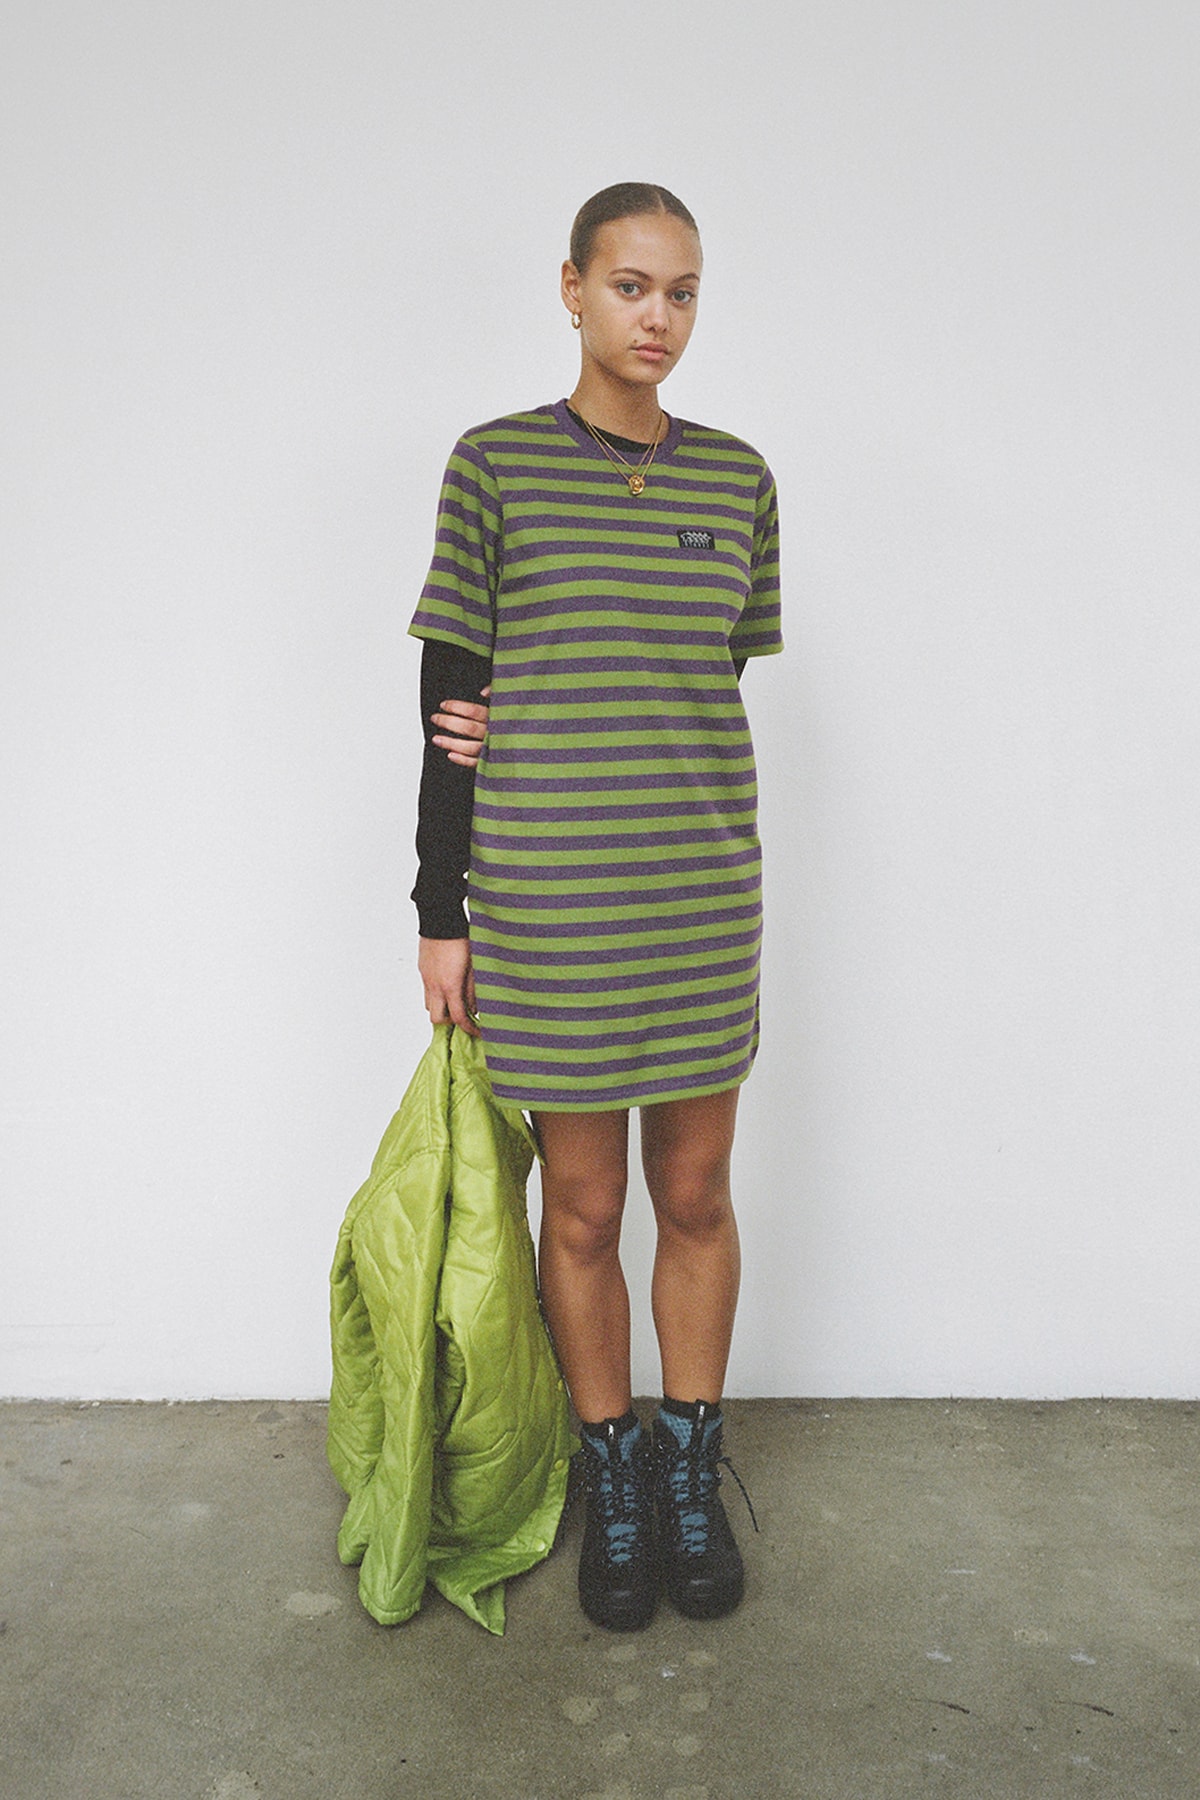 Stussy Women's Holiday 2018 Collection Lookbook T-shirt Dress Green Blue